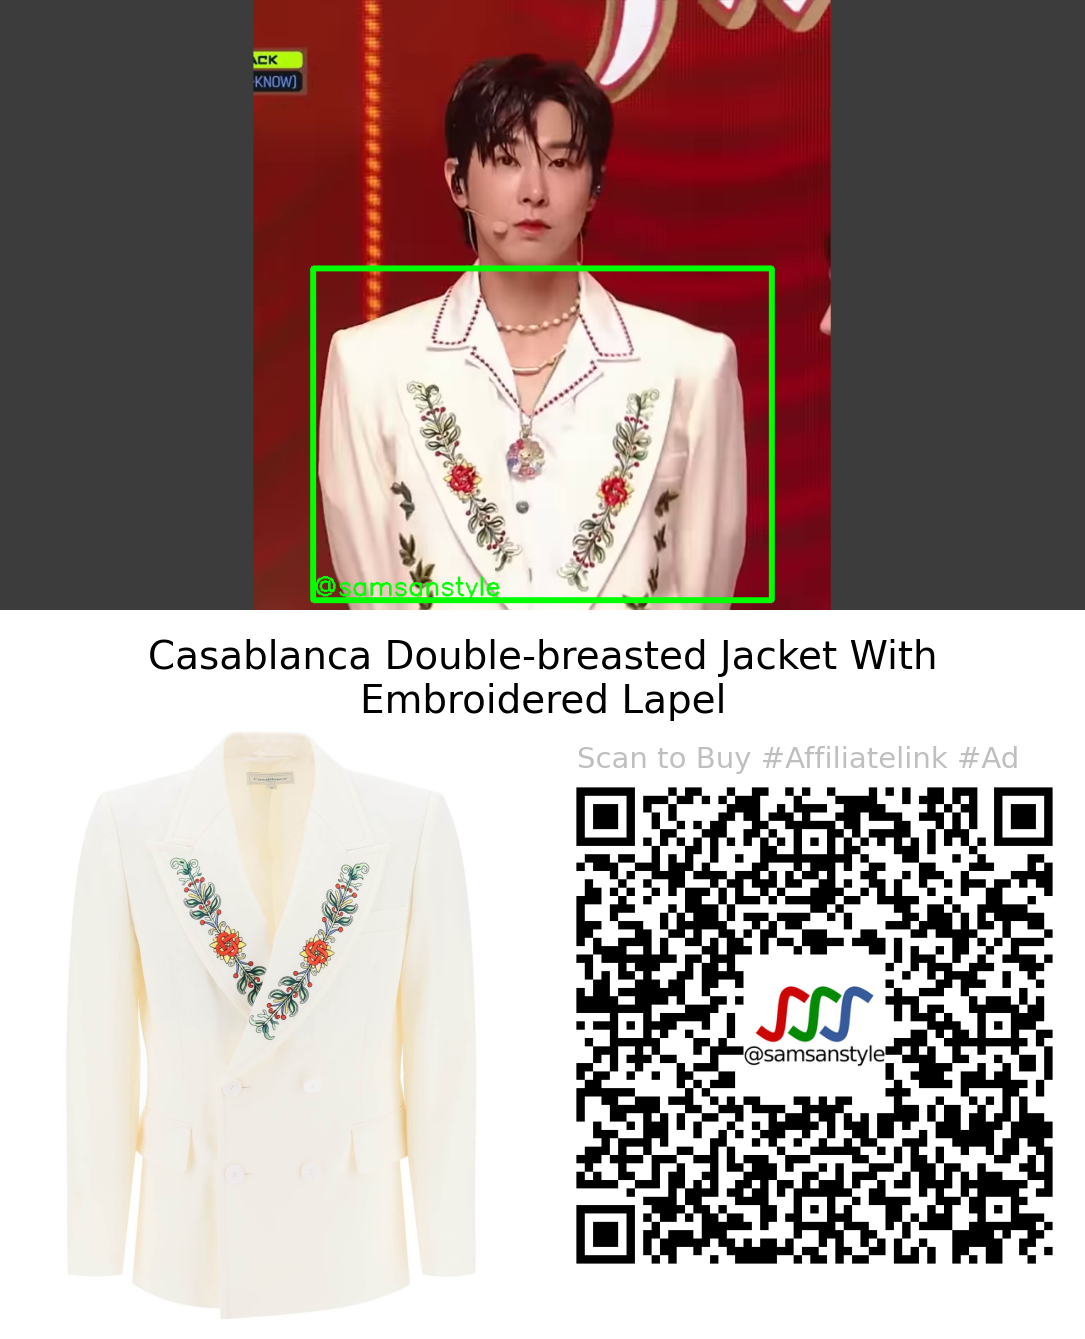 U-KNOW | Vuja De Mnet M Countdown | Casablanca Double-breasted Jacket With Embroidered Lapel